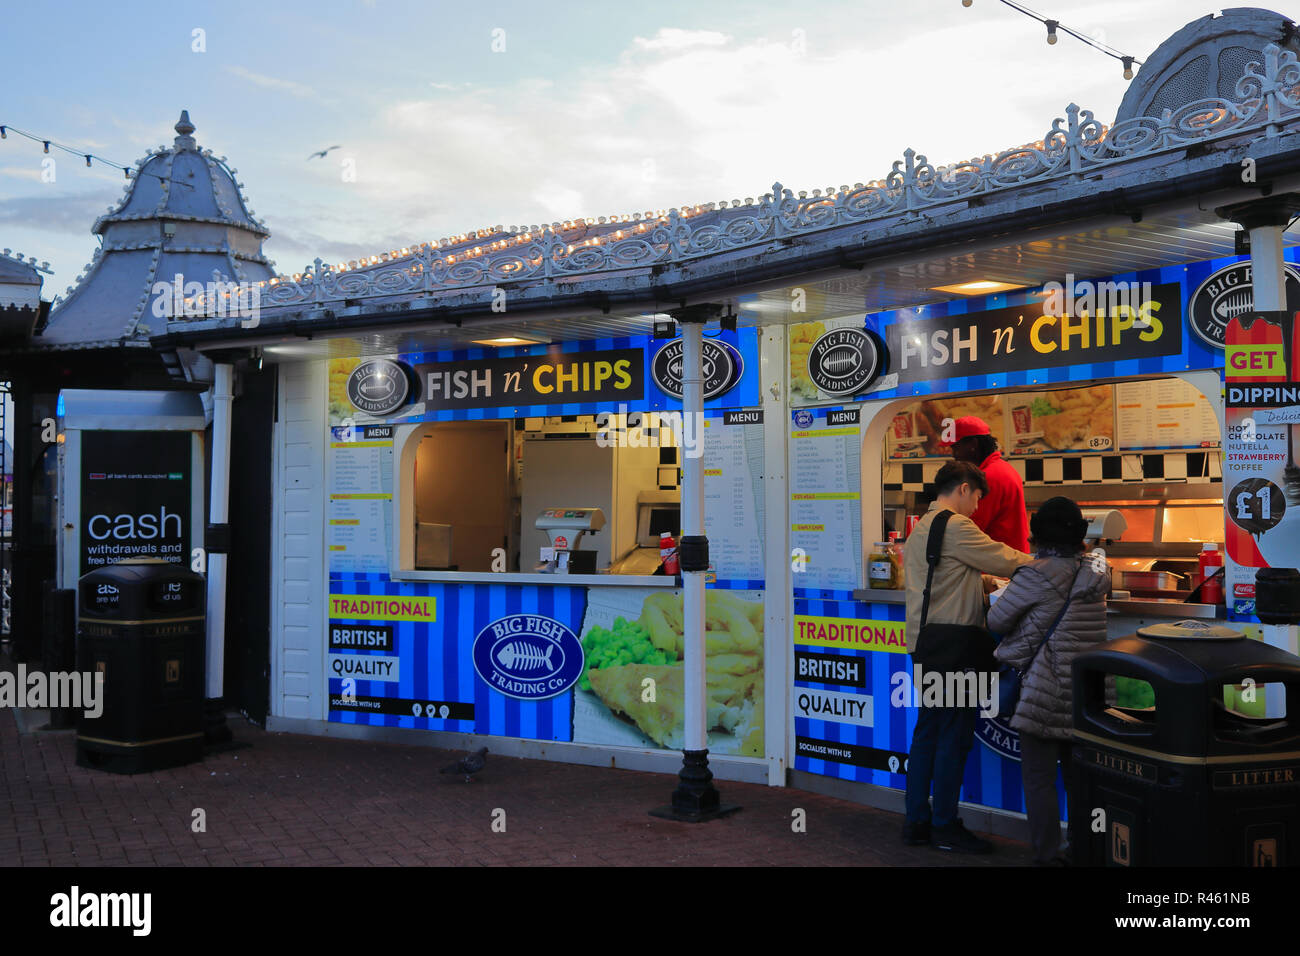 BRIGHTON, EAST SUSSEX, ENGLAND, UK - NOVEMBER 13, 2018: Customers buying street food from a traditional British fish and chips takeaway. Stock Photo